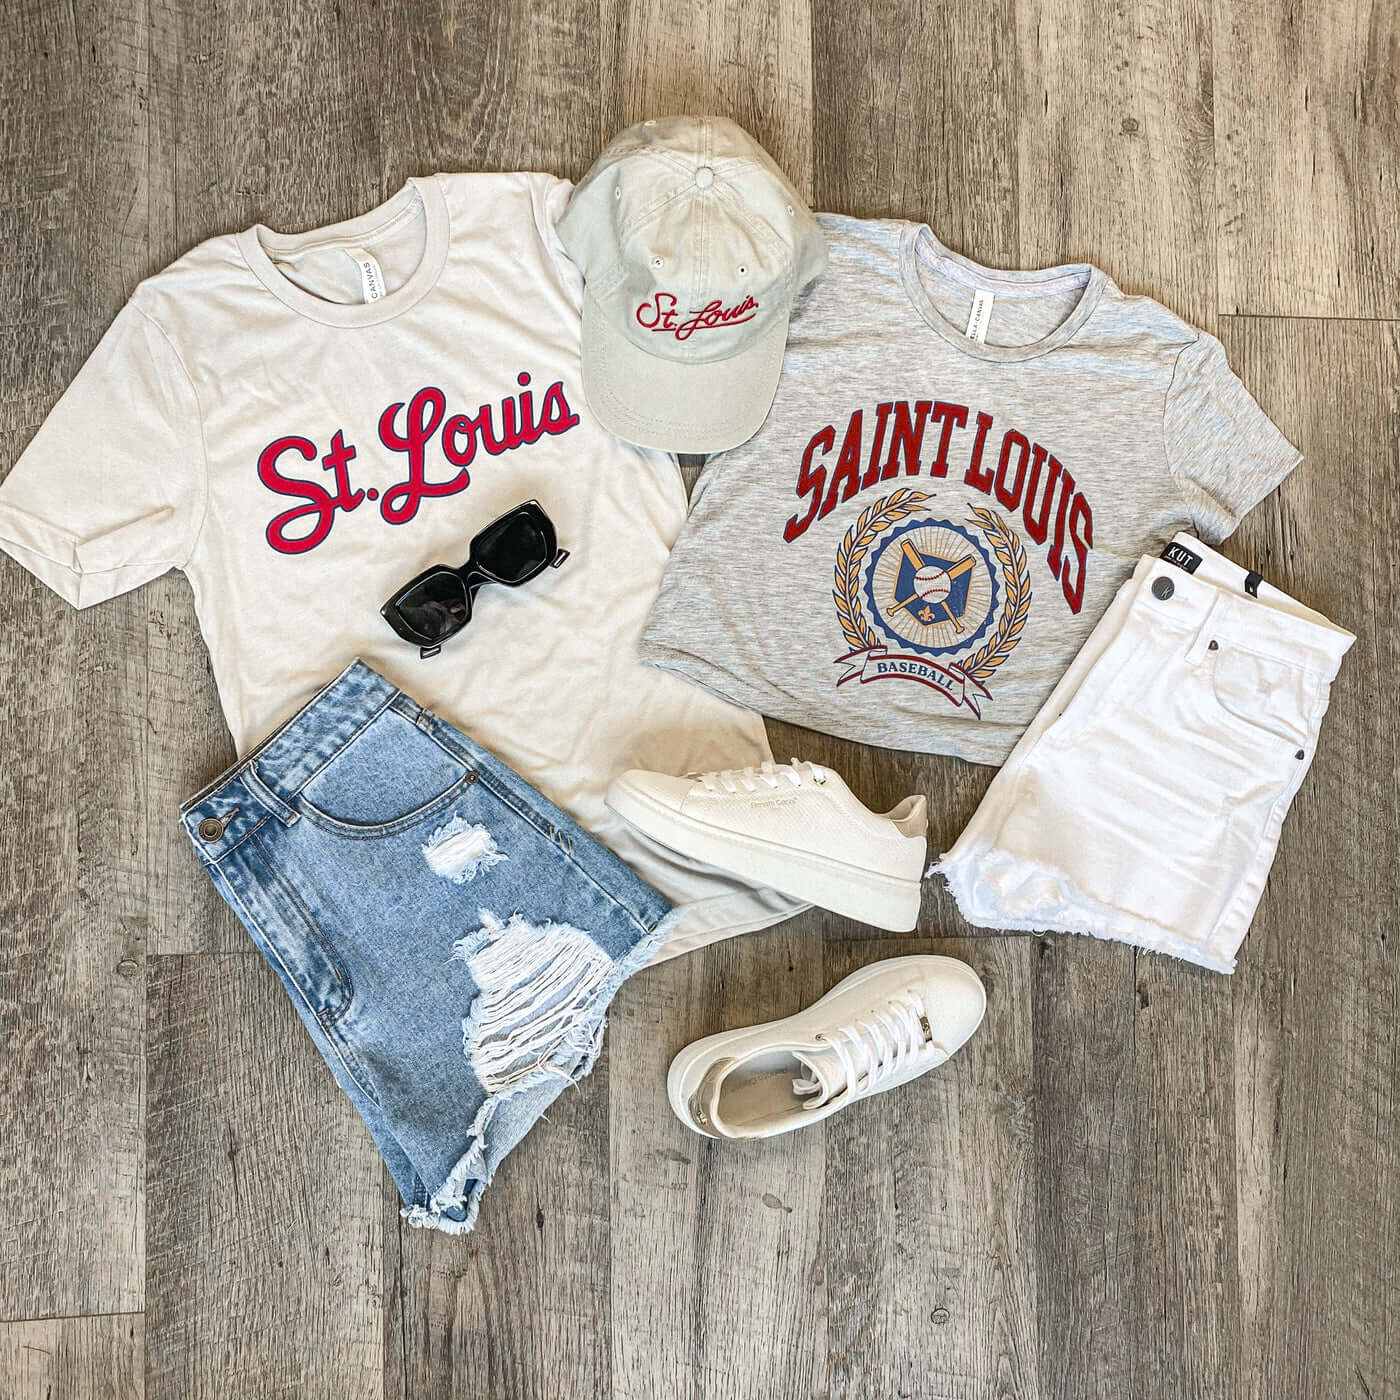 What to Wear to a St. Louis Cardinals Baseball Game